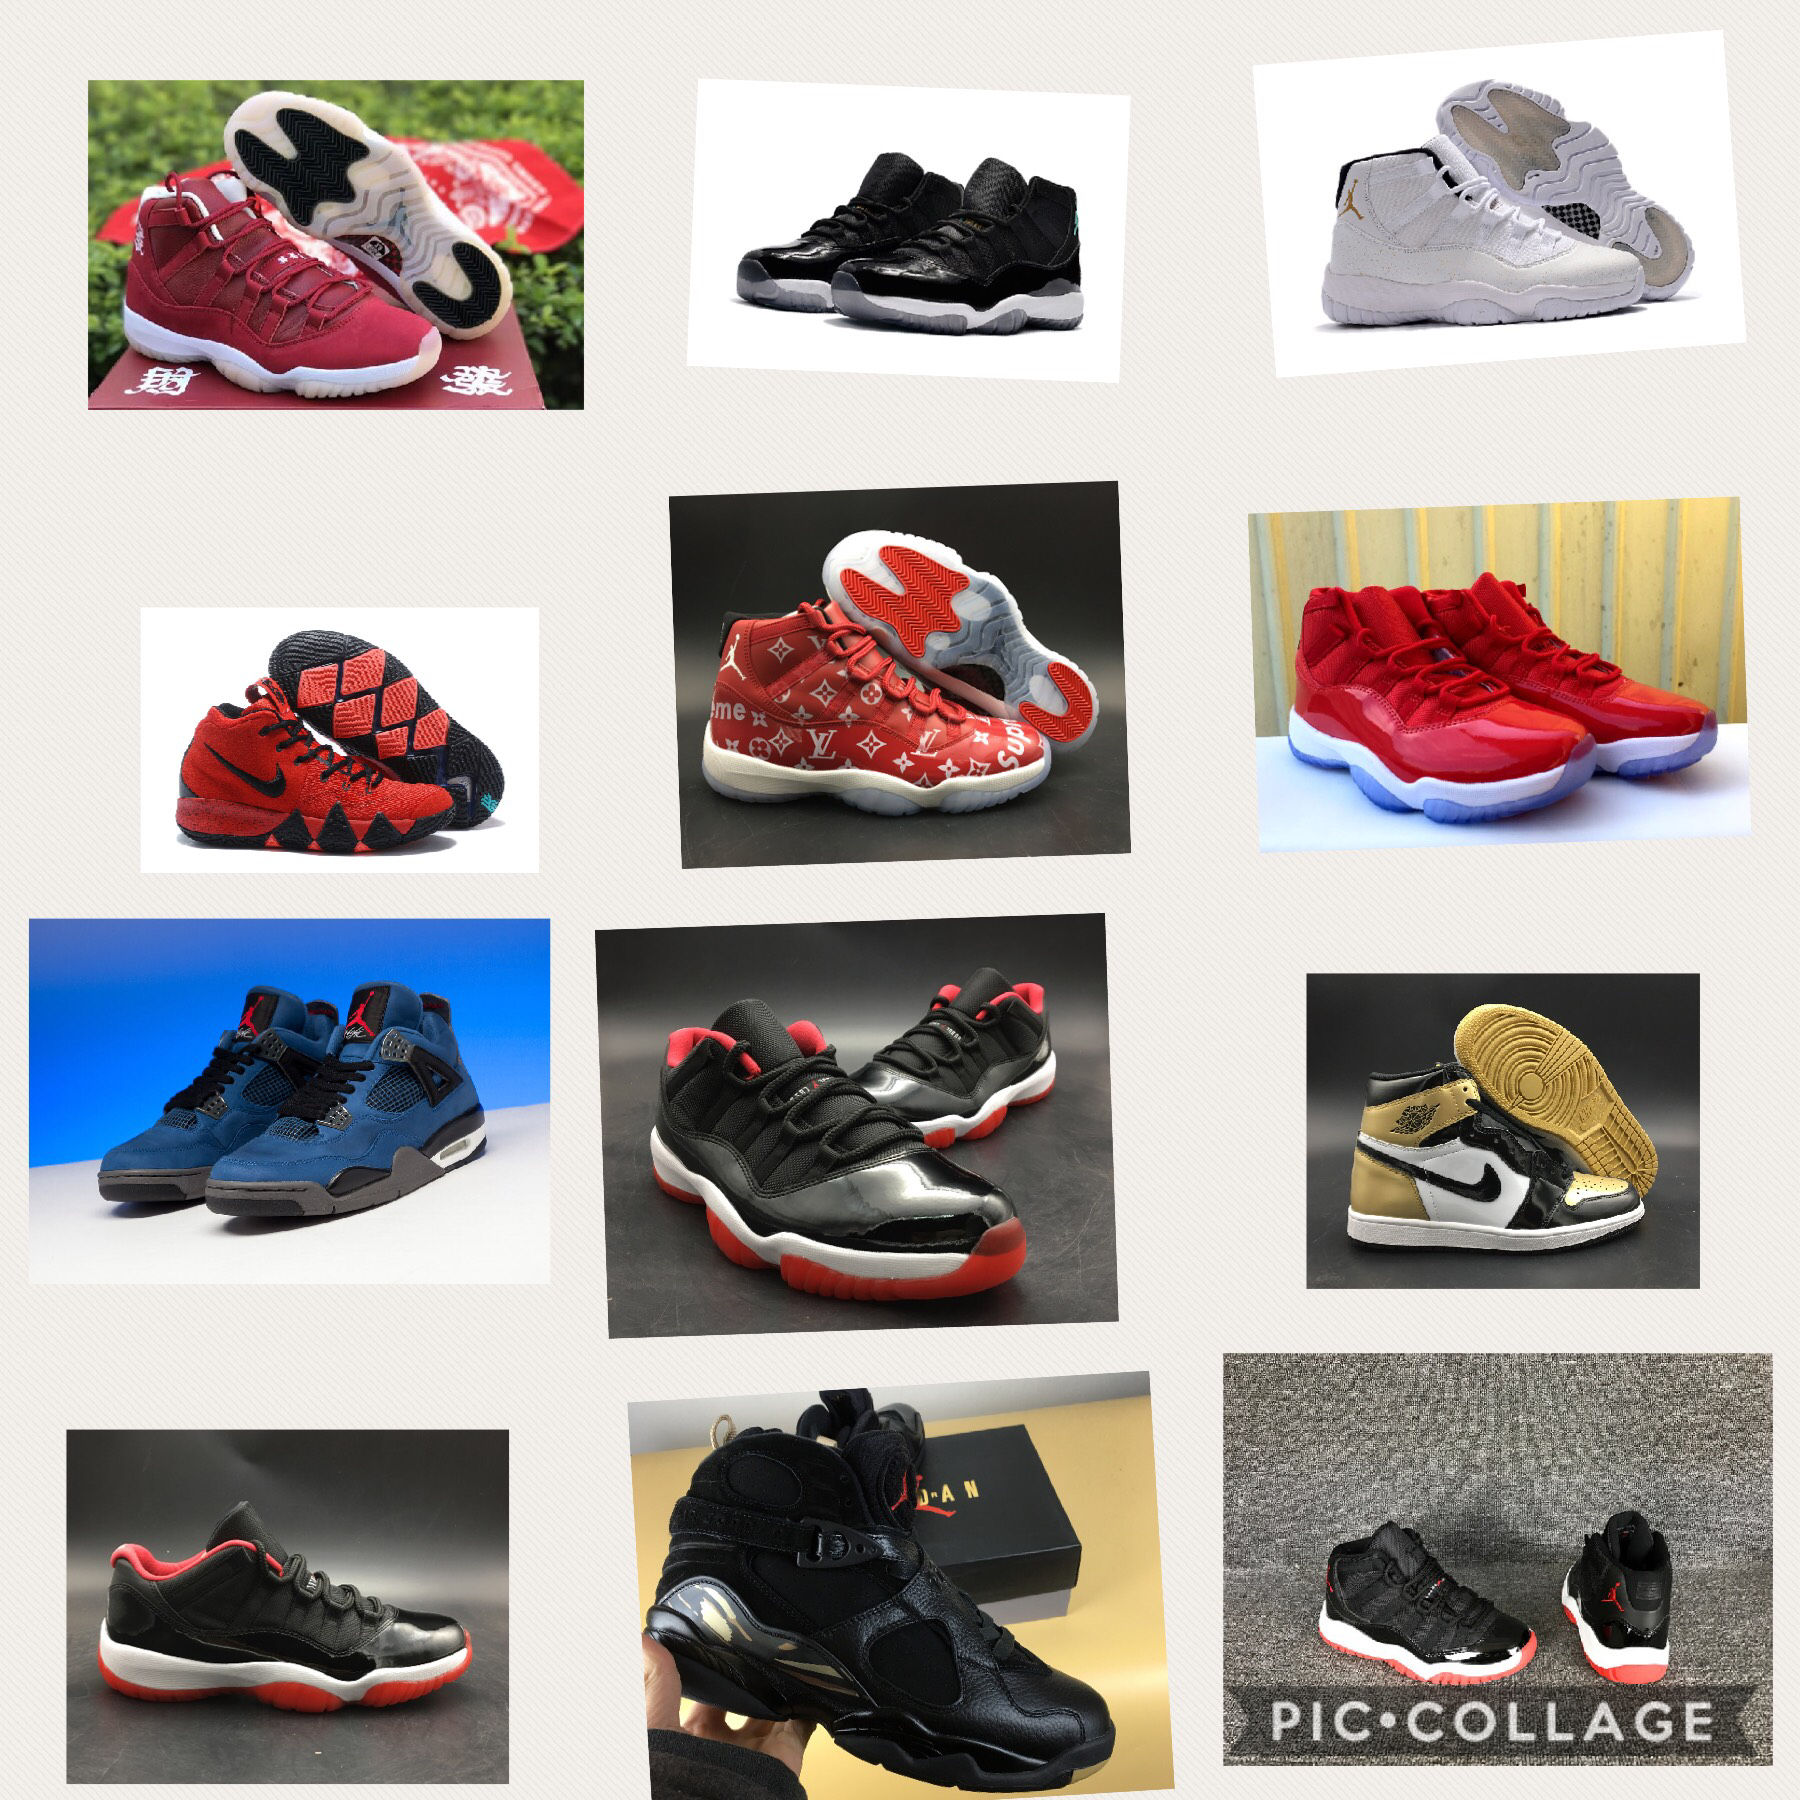 Bro I got all of the Jordan if you some bro go to footlocker and buy you or if you don’t have a lot of money I can hook you up bro you no you no